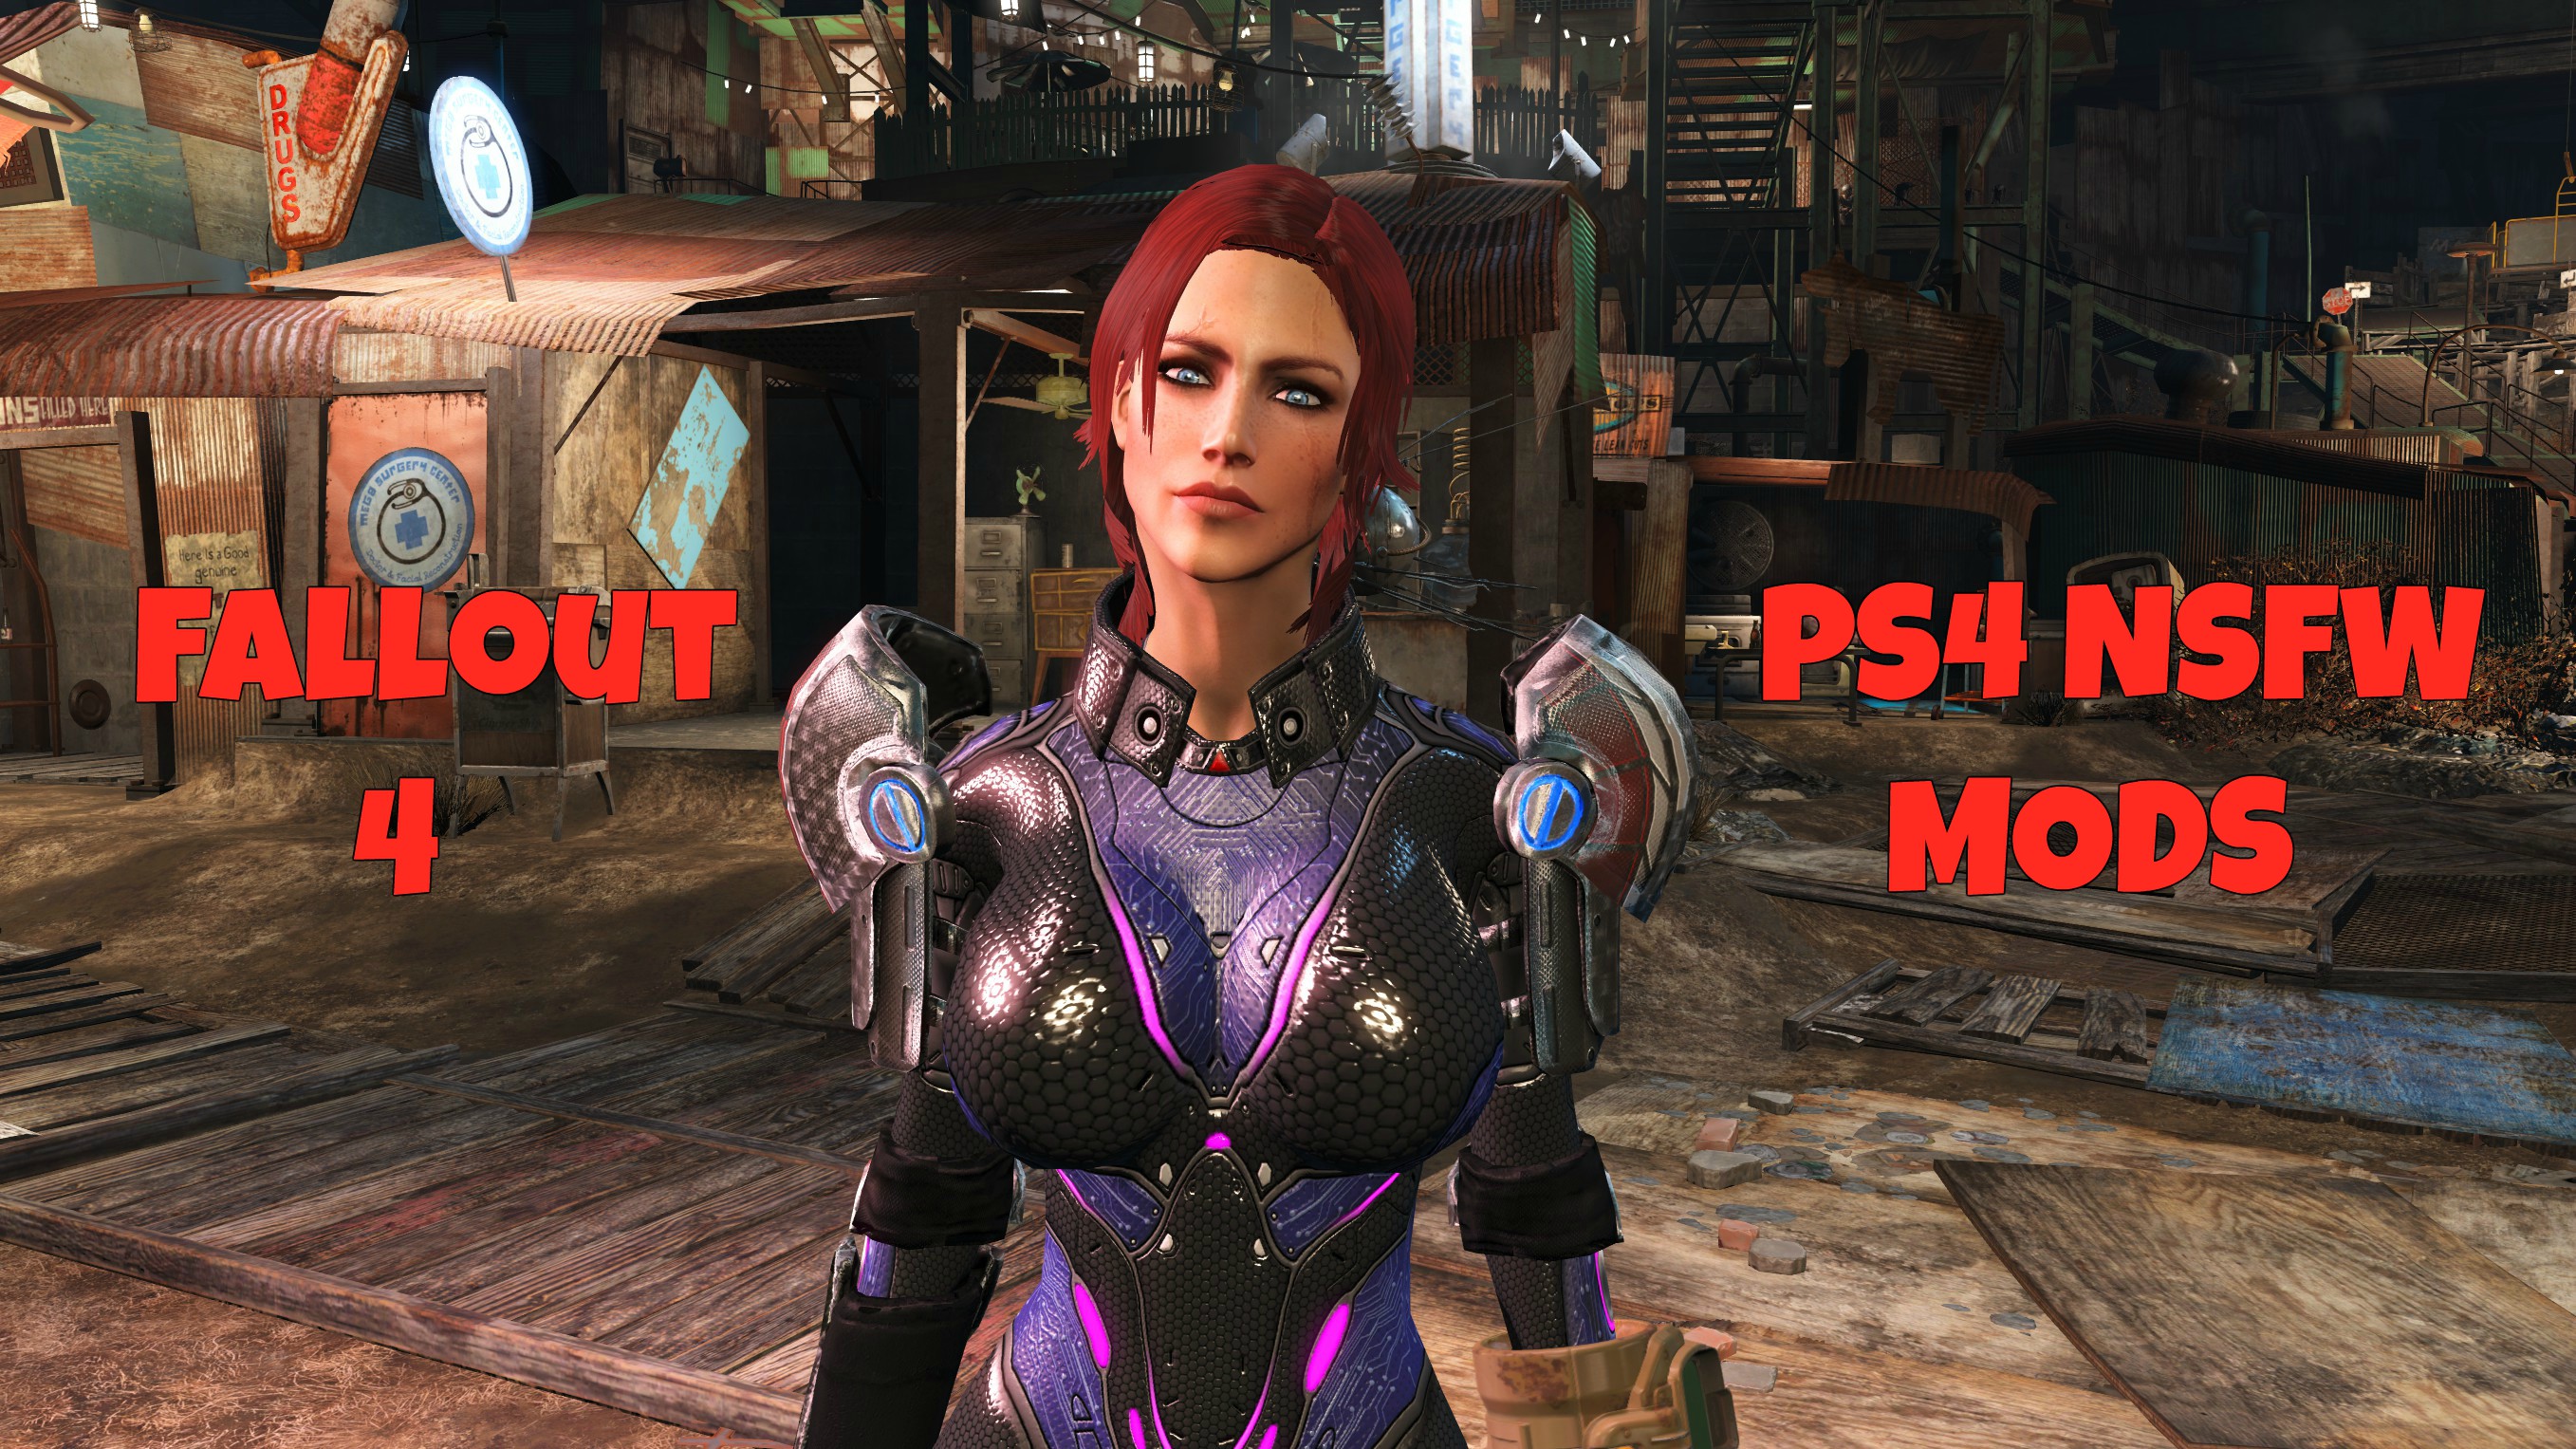 Fallout 4 Ps4 Nudensfw Mods A Look At The Limited Options Available Gameskinny